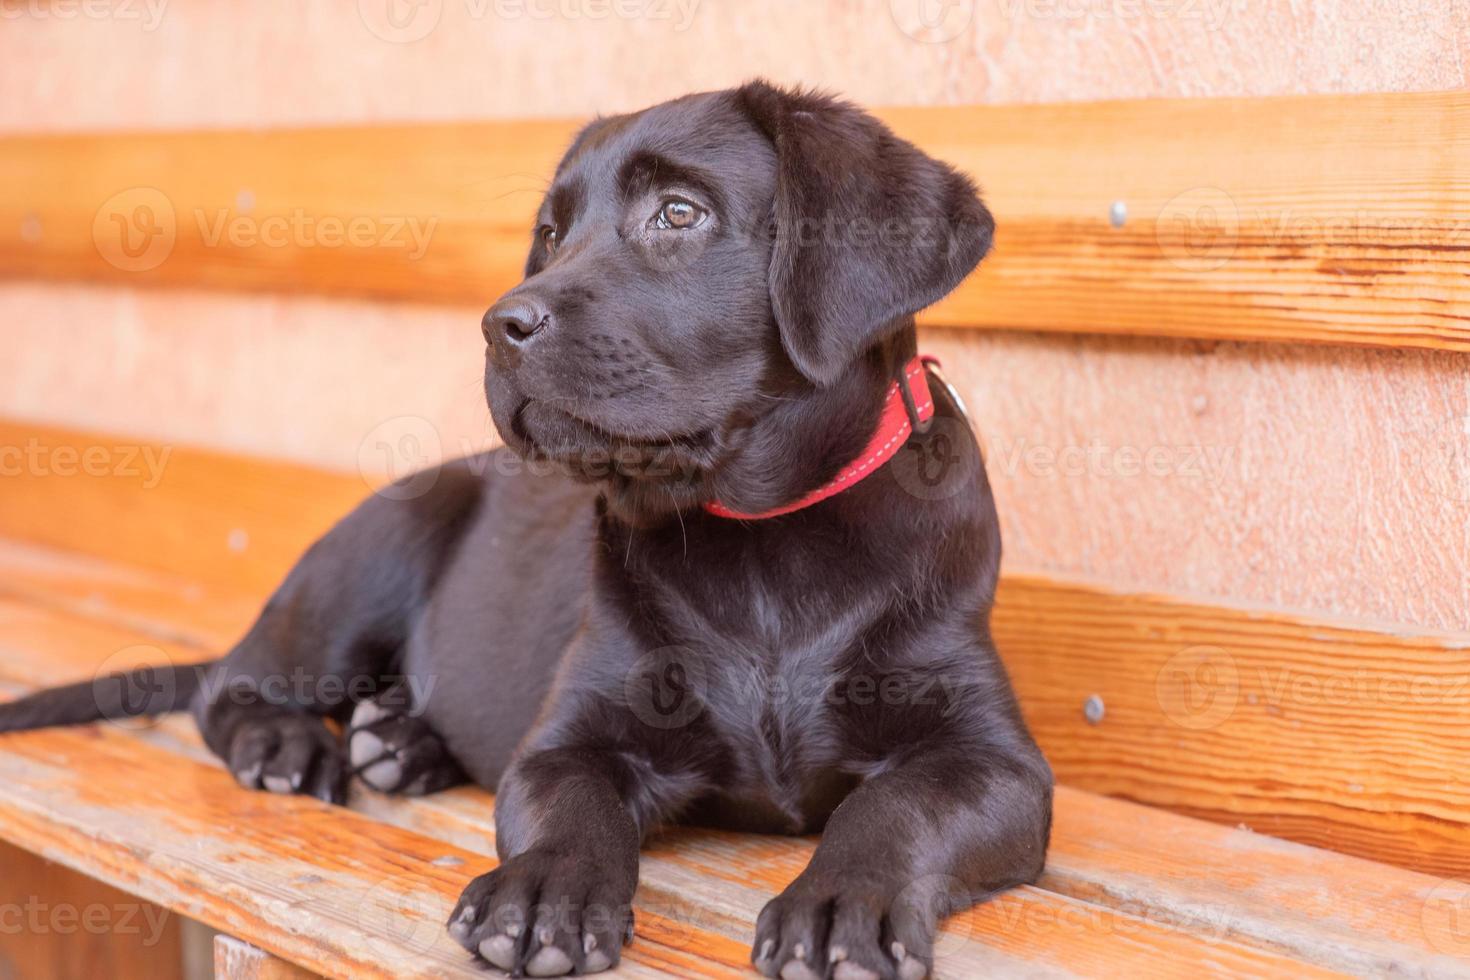 The puppy rests on the bench. Black labrador retriever dog in a red collar. photo